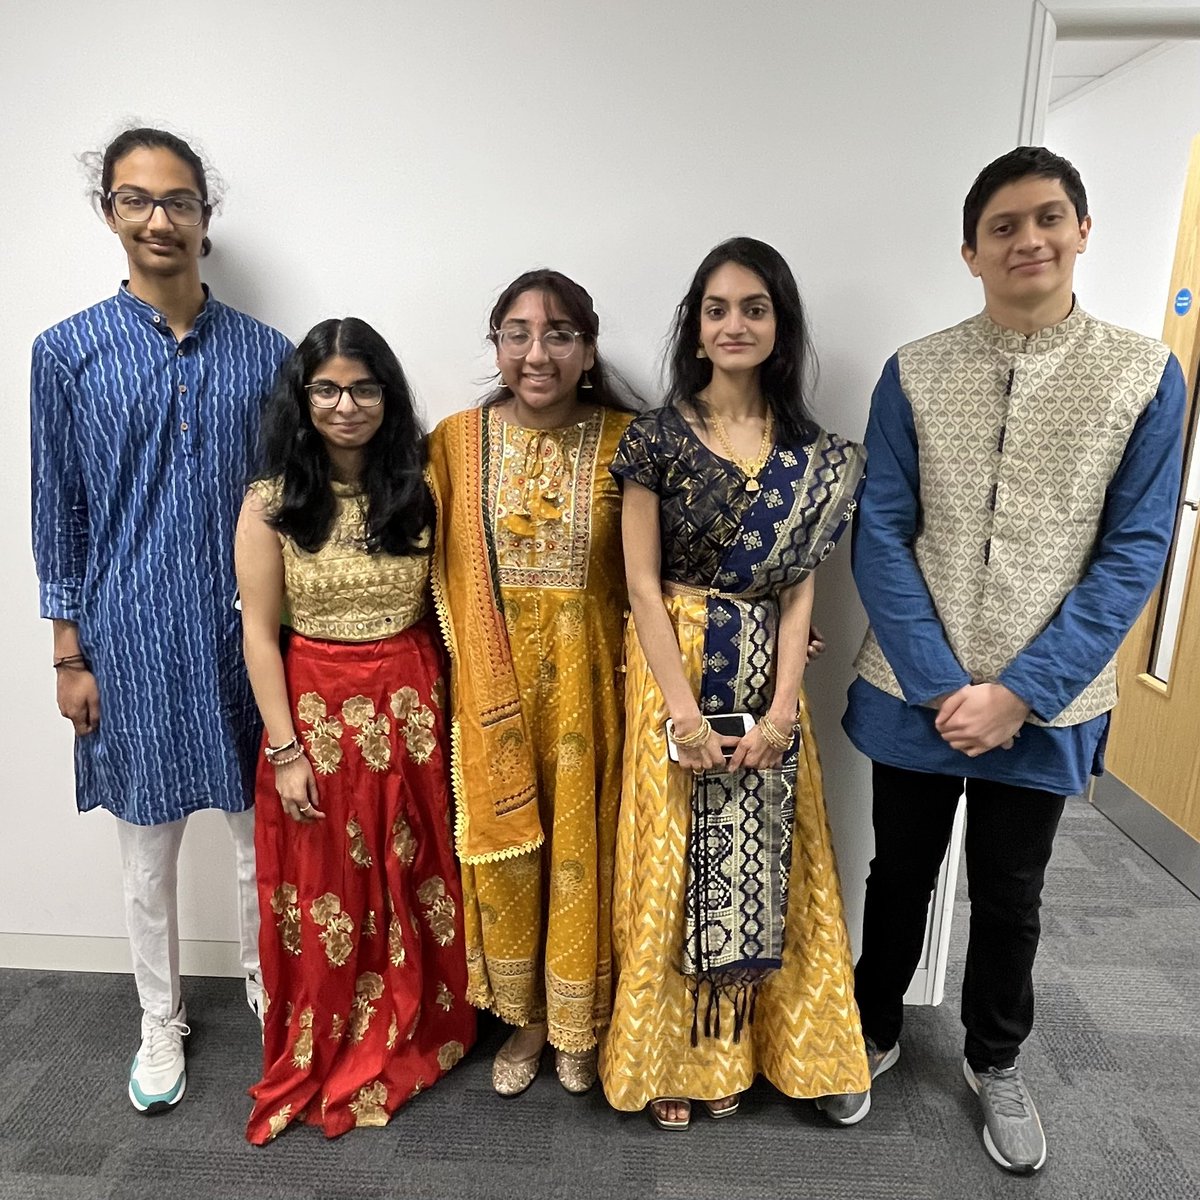 Some of our #SJCSixthForm celebrating our #SJCCultureDay by wearing their traditional dress! Everyone is looking fabulous! 🤩#SJCDiversity #SJCFamily